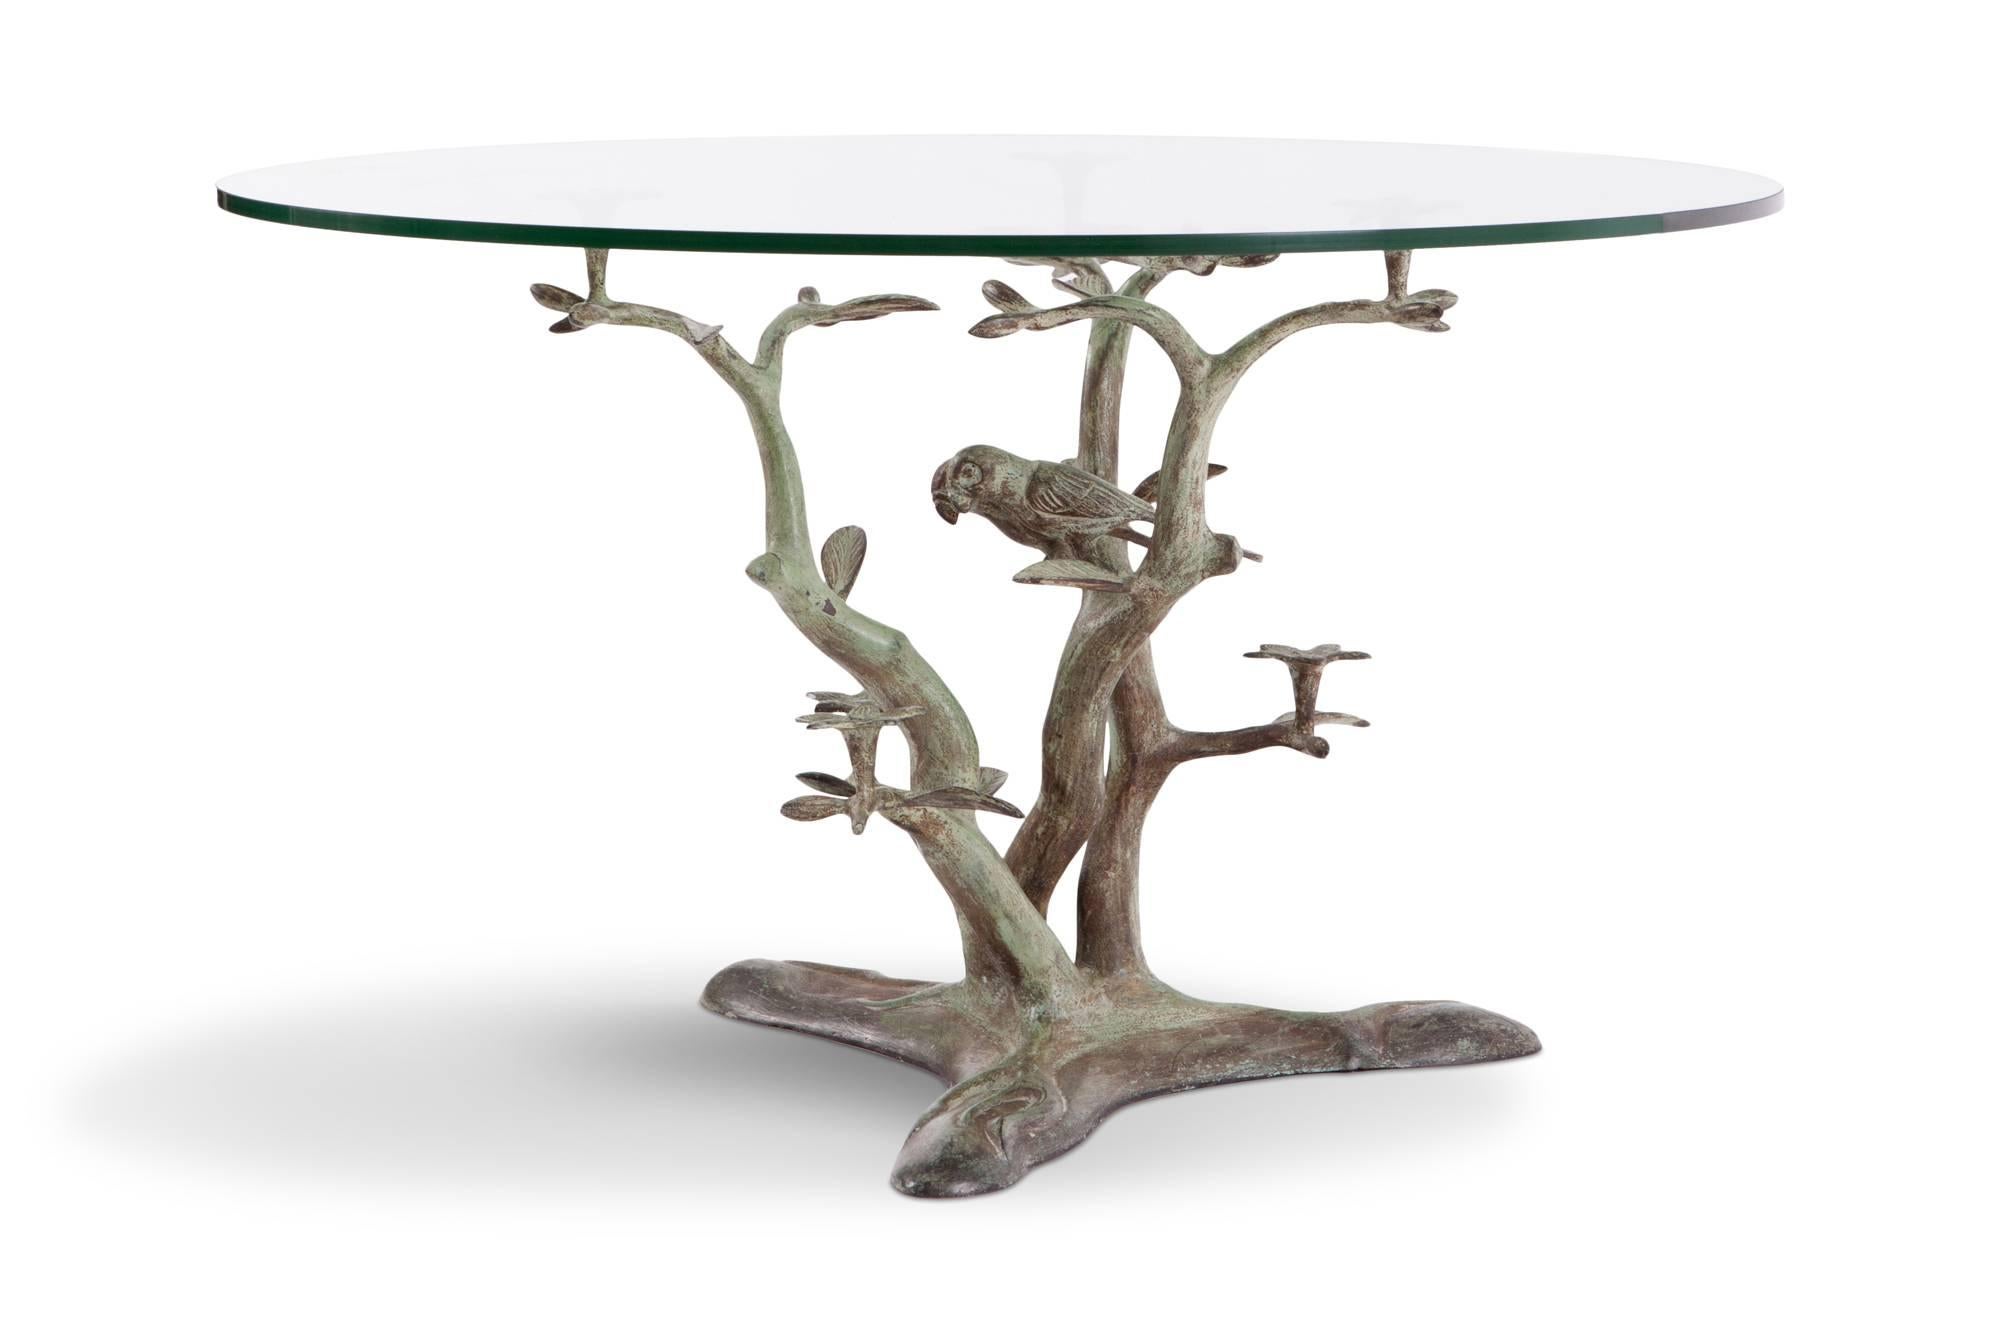 Hollywood regency decorative patinated bronze coffee table with round glass table top. The table displays several branches with leafs and flowers and in the centre a couple of parrots. The bronze base has a nice green color patina.

Measures: Ø 80 H